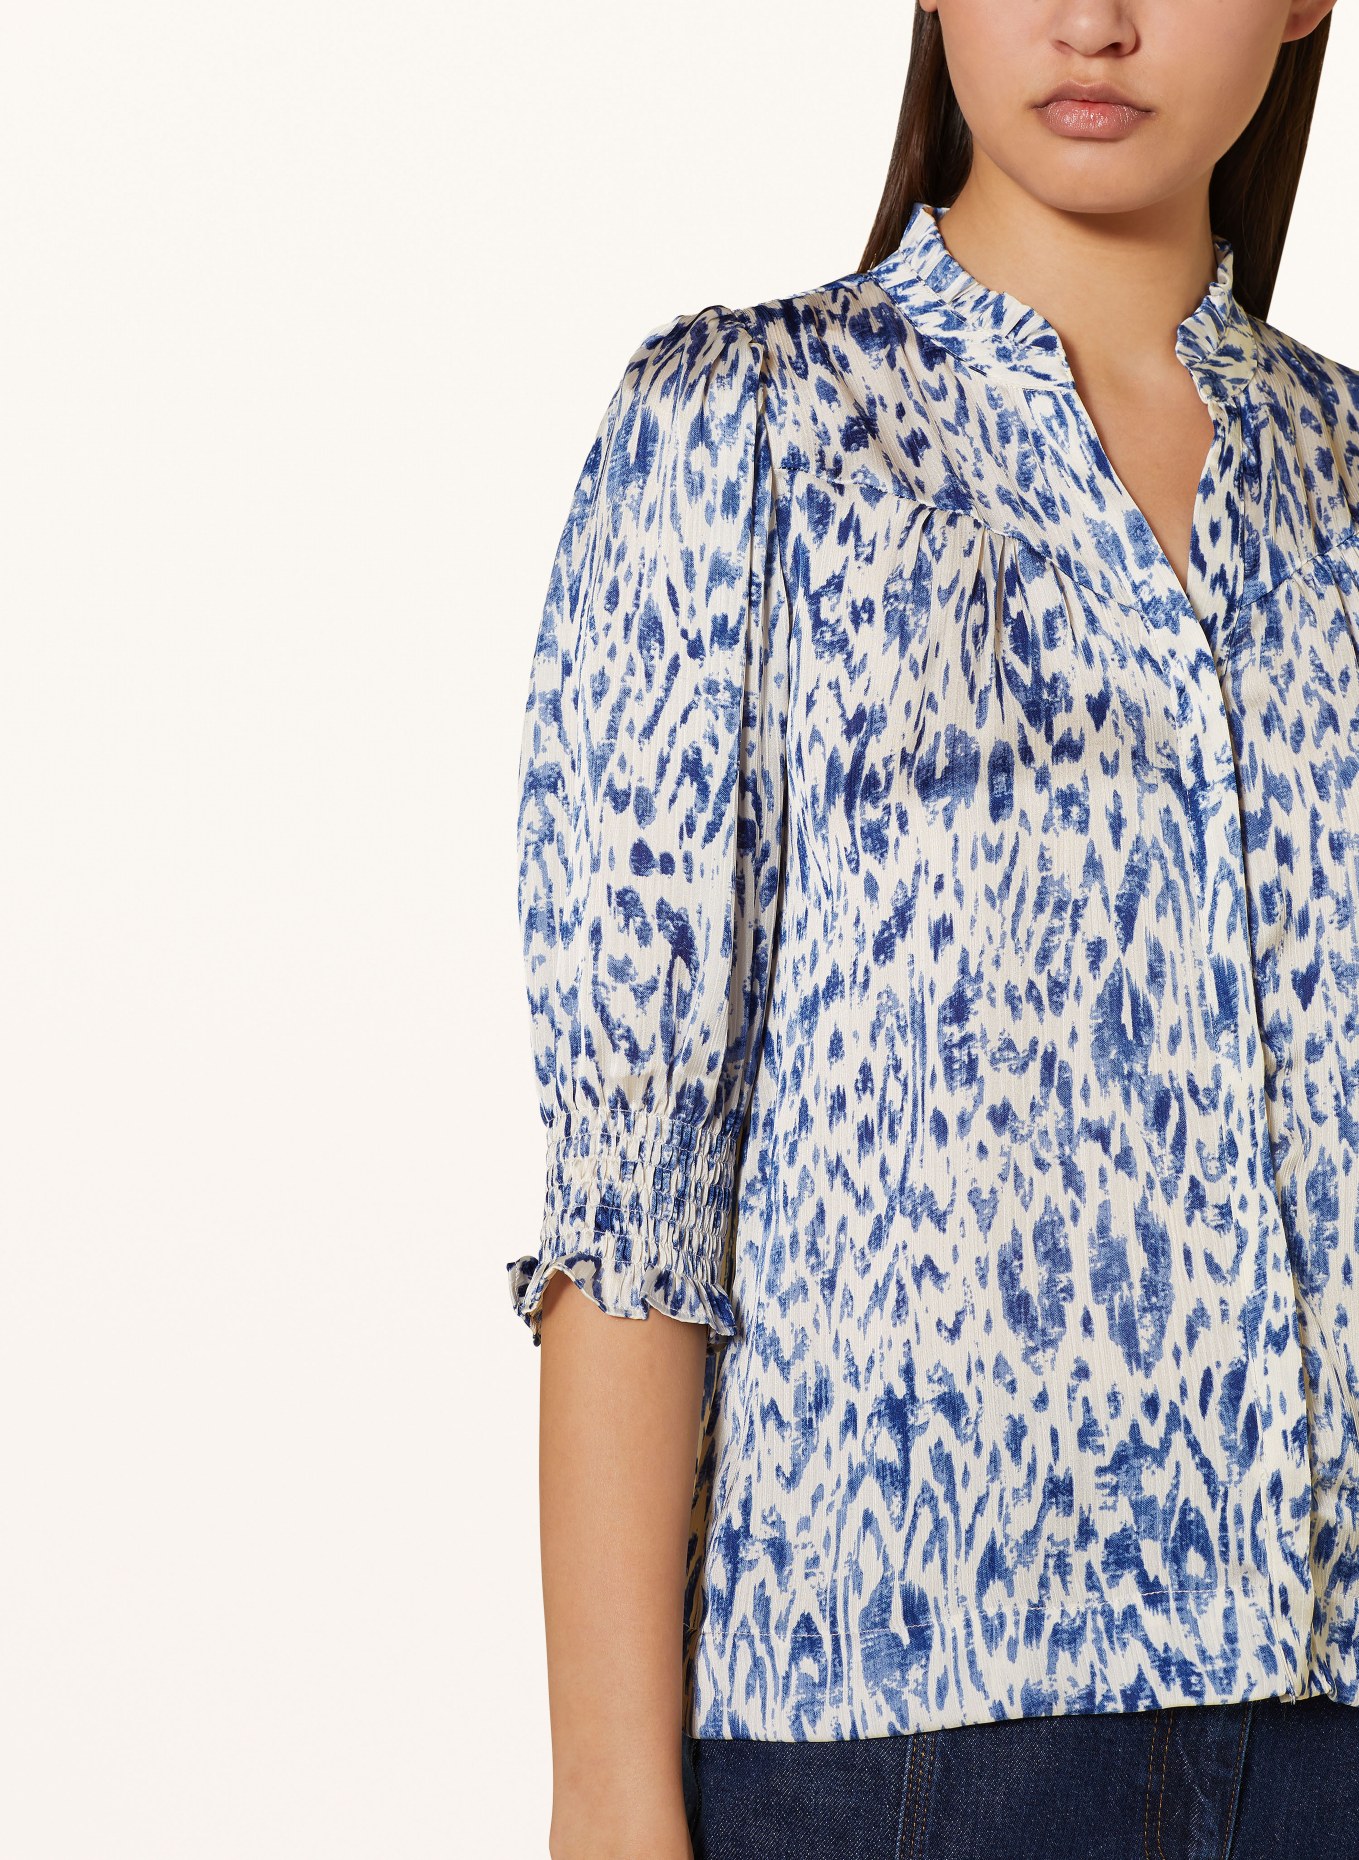 NEO NOIR Blouse DIANA with 3/4 sleeves, Color: BLUE/ WHITE (Image 4)